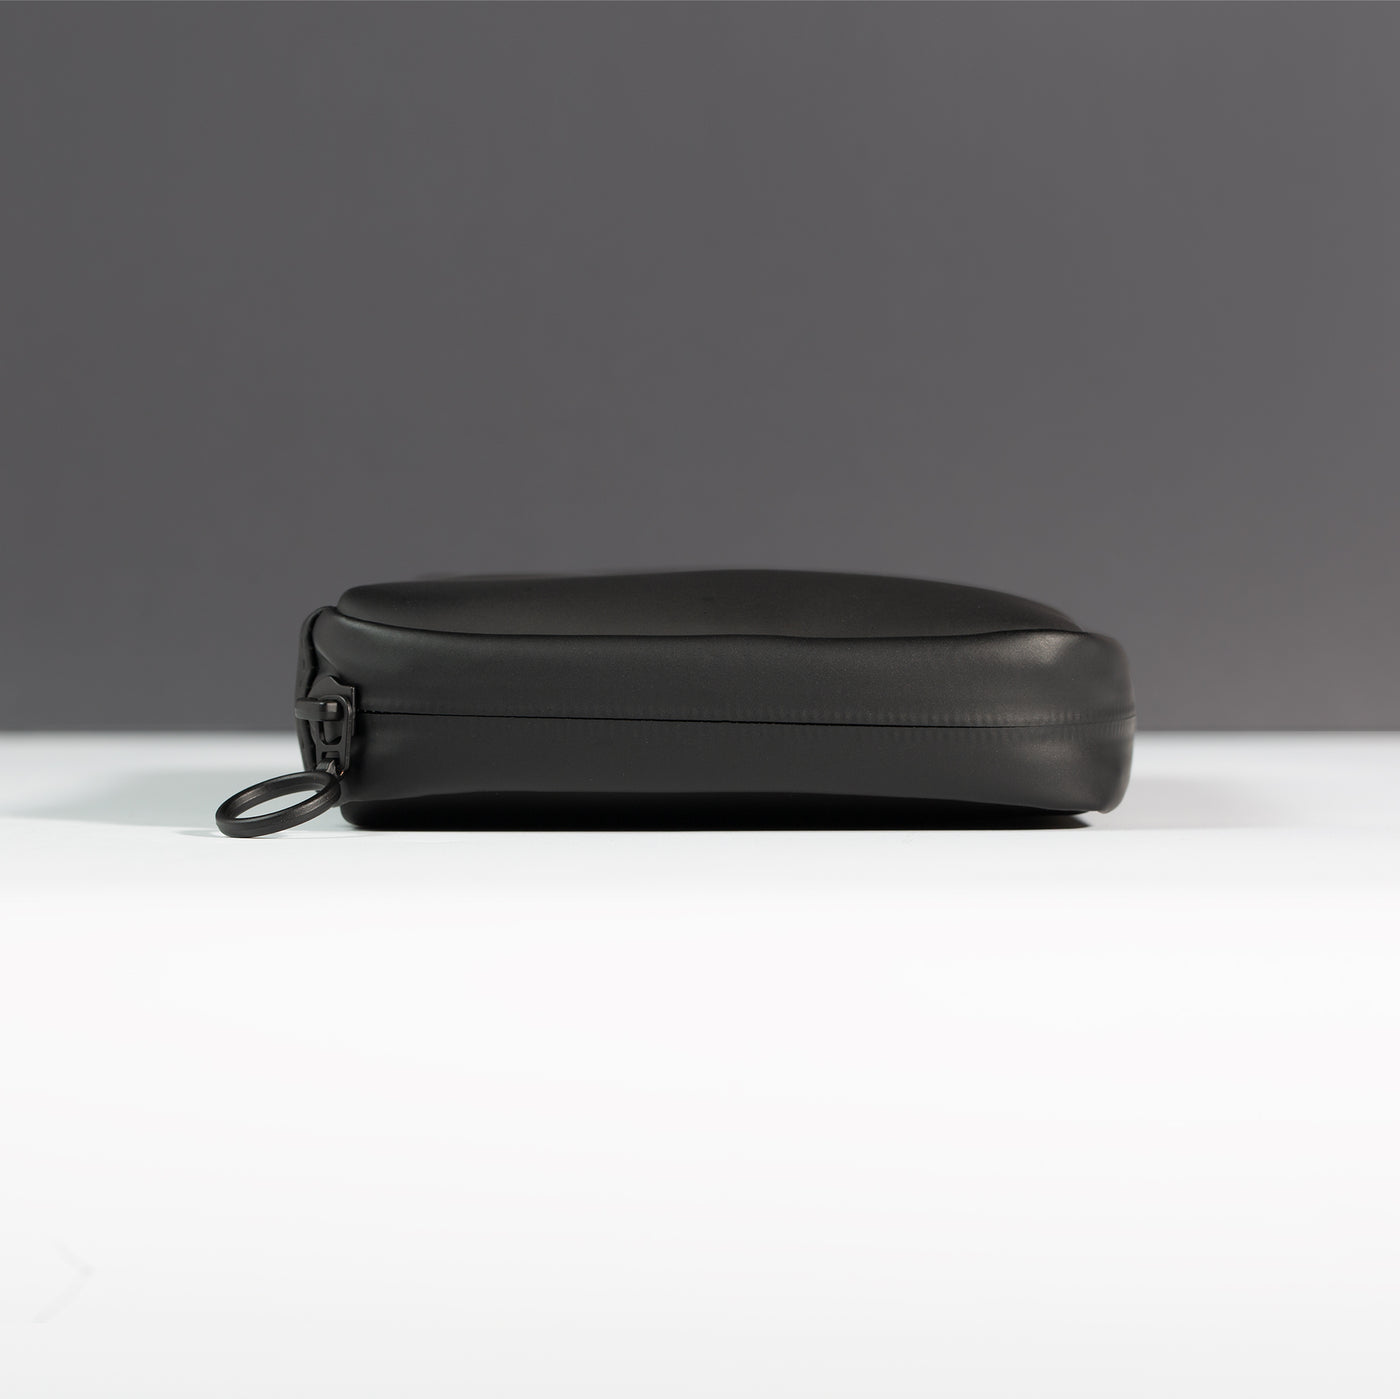 Side profile of the Miho Black Eco Essentials Pouch on a white surface with a black background. Image shows detail of outer black waterproof zipper tape and metal O-ring zip puller.